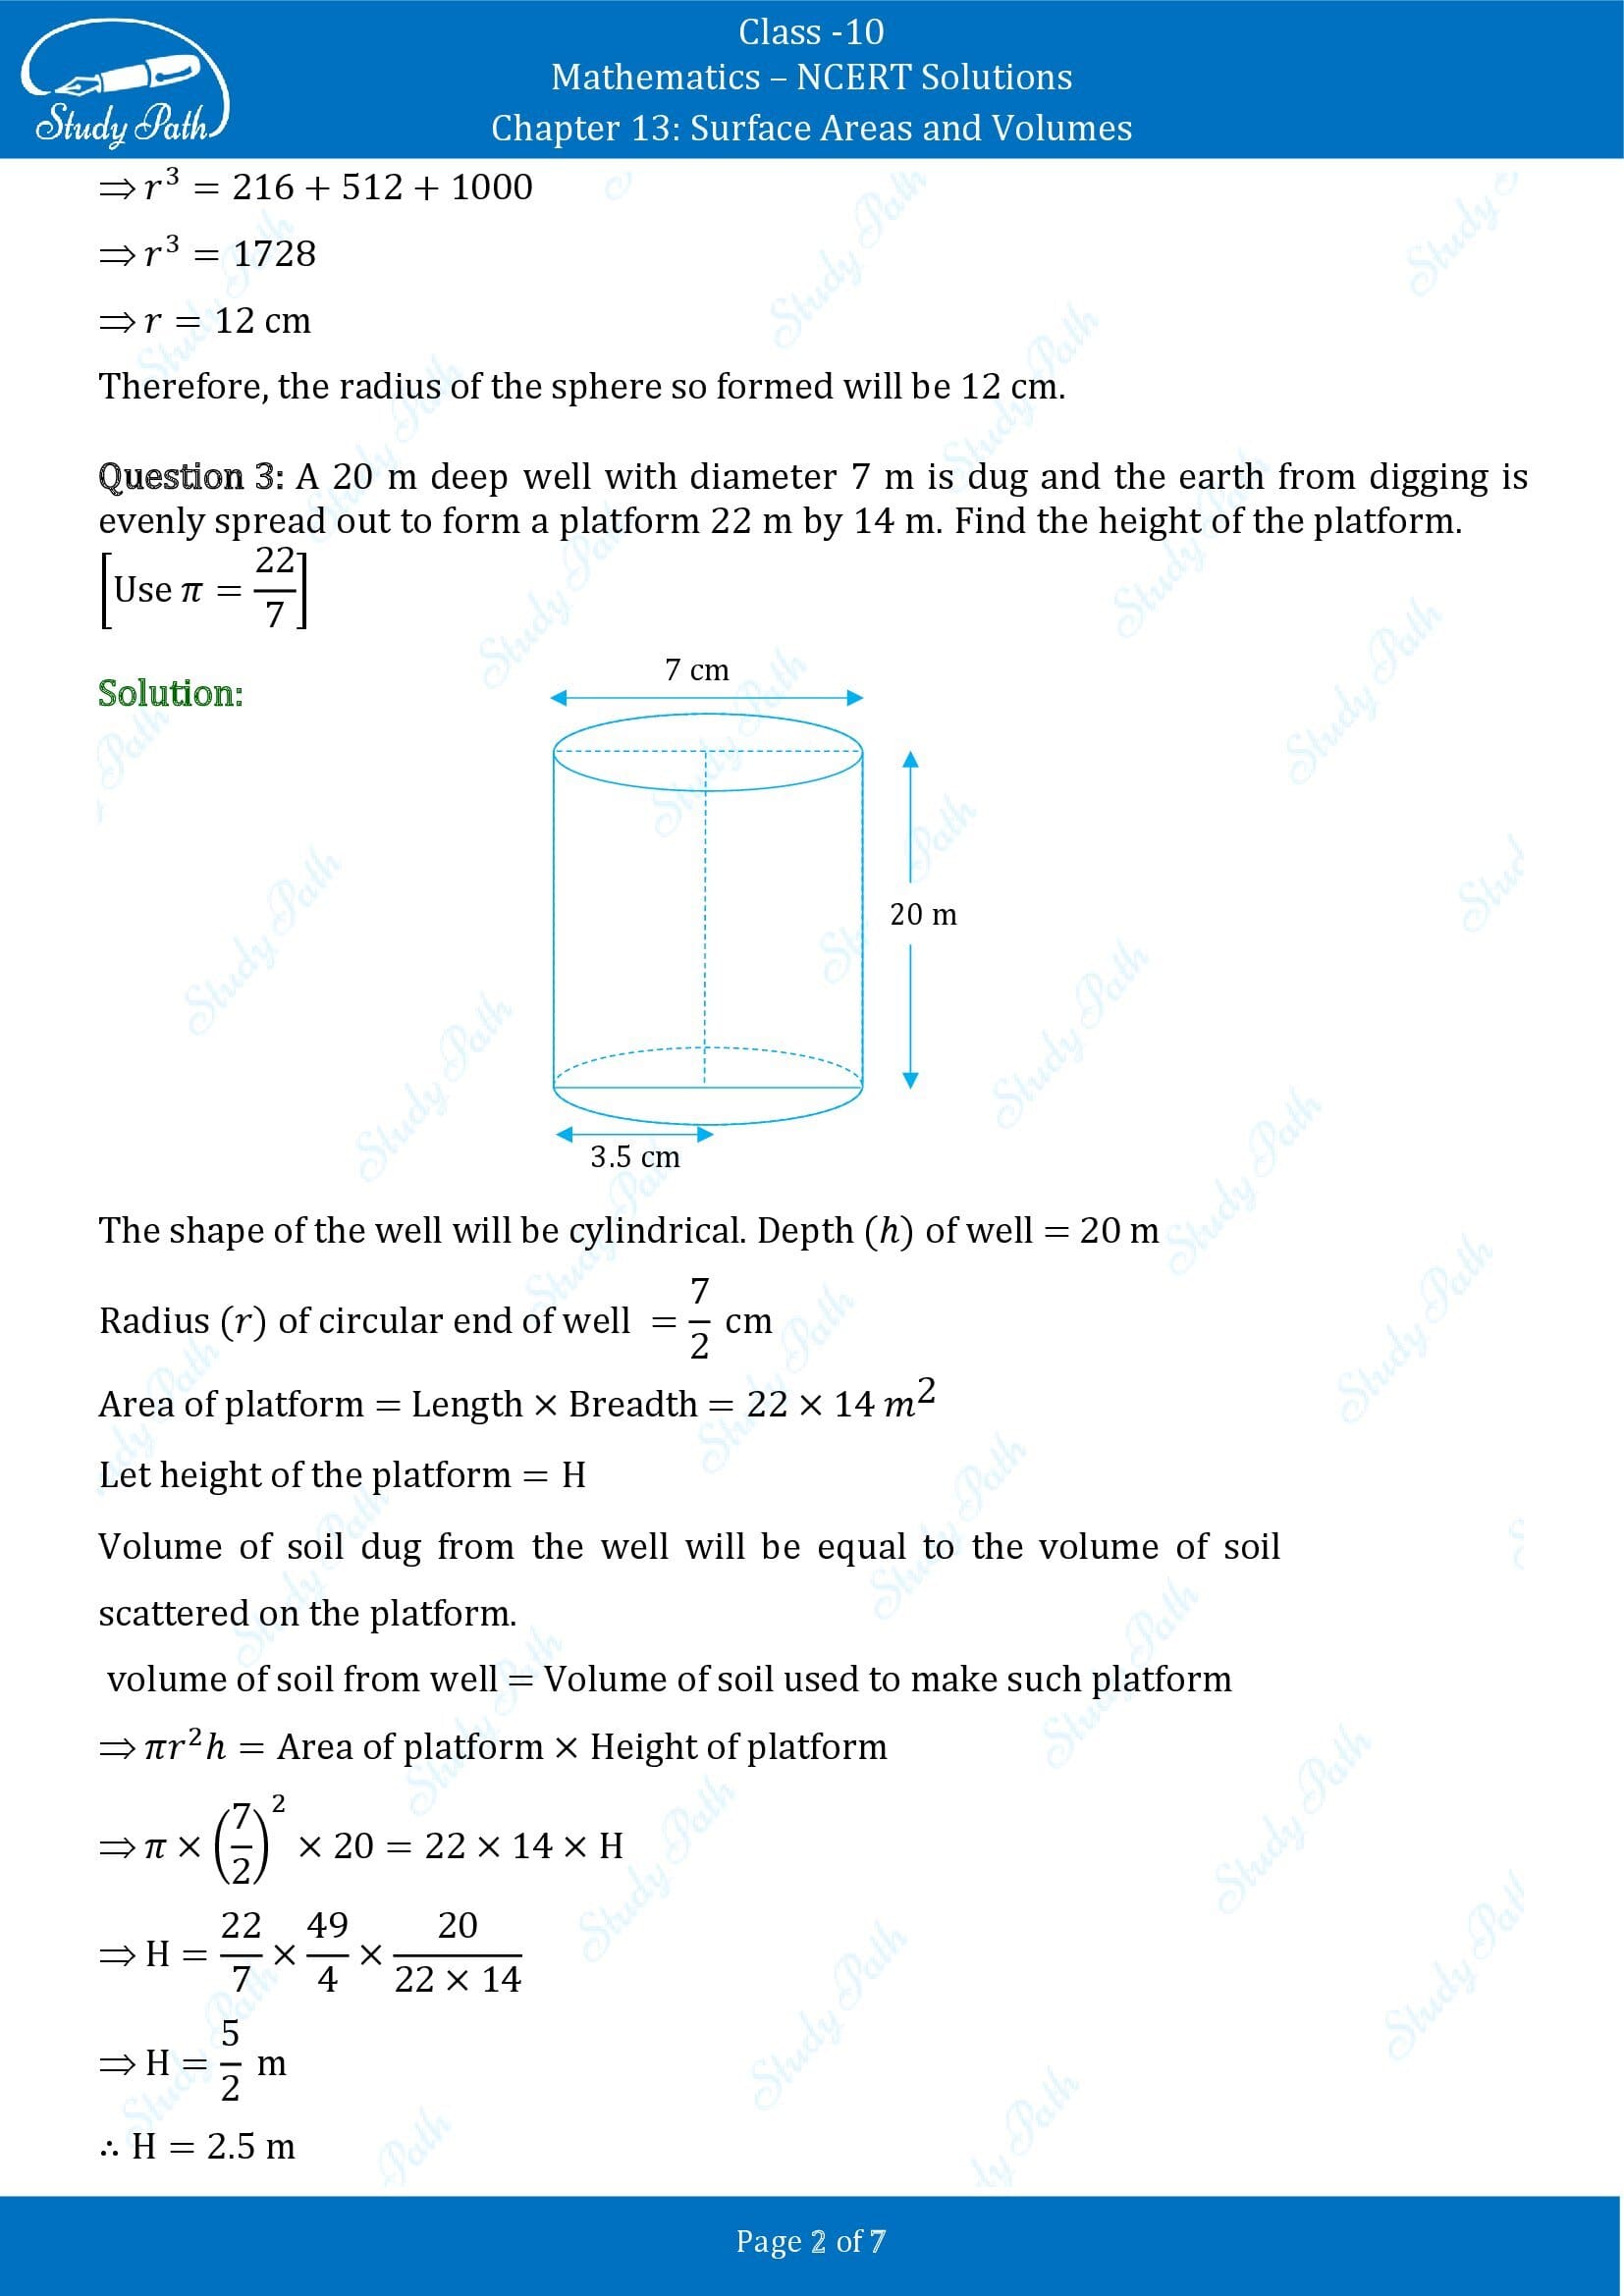 NCERT Solutions for Class 10 Maths Chapter 13 Surface Areas and Volumes Exercise 13.3 00002